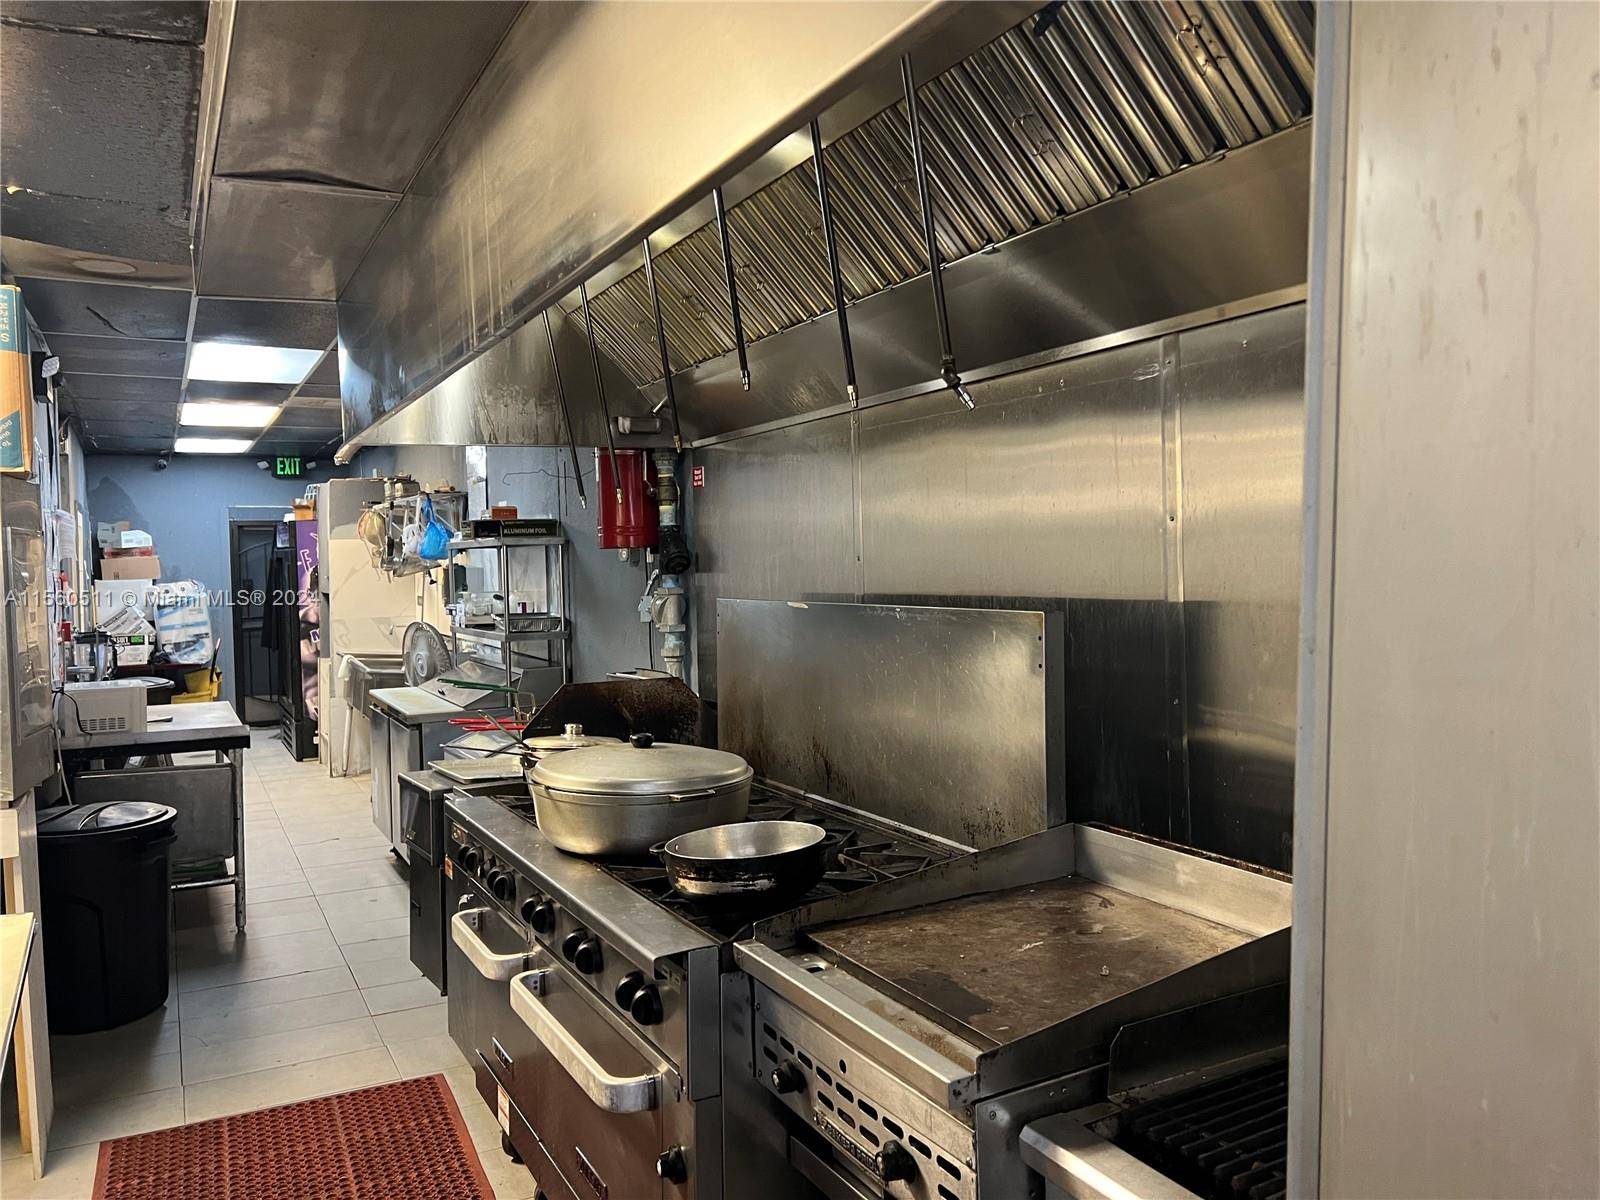 TAKE OUT RESTAURANT CARIBBEAN GRILL RESTAURANT FOR LEASE IN THE HEART OF HOLLYWOOD BLVD, FULLY EQUIPPED AND READY TO GO ALL LICENSES IN PLACE AND OPEN JUST 2 YEARS AGO ...